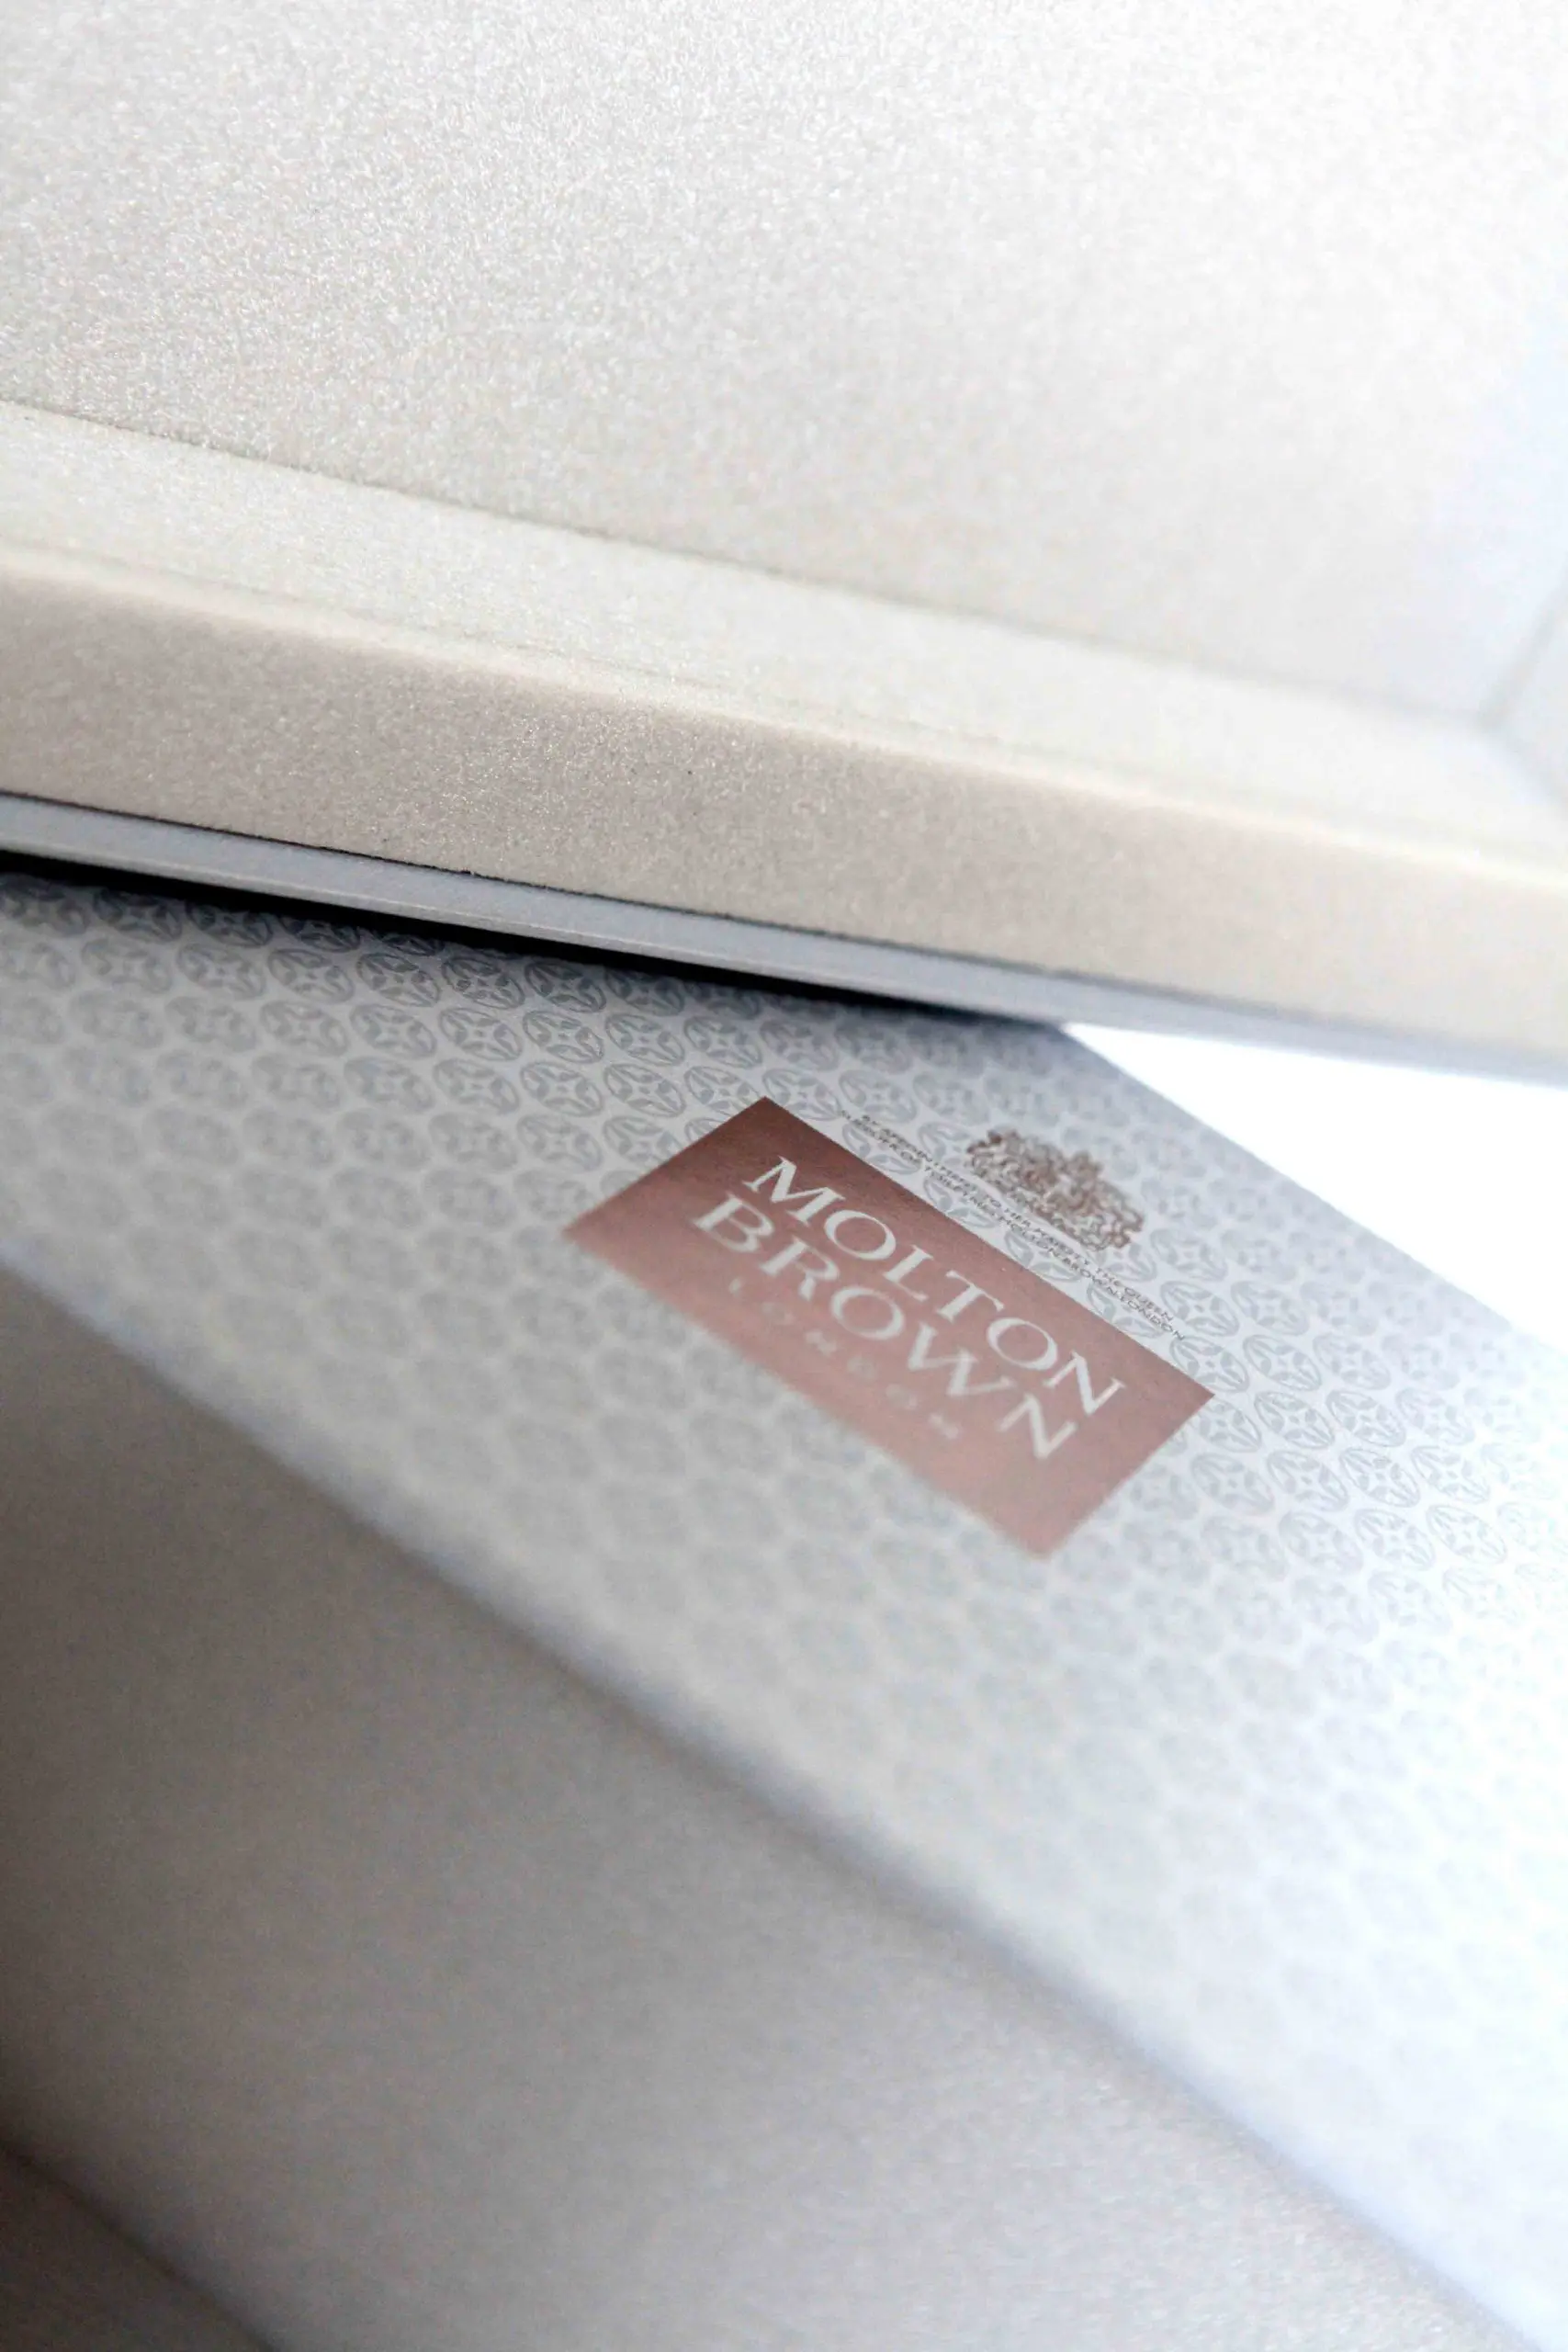 Molton Brown box with foam insert. luxury product dosplay, product protection.